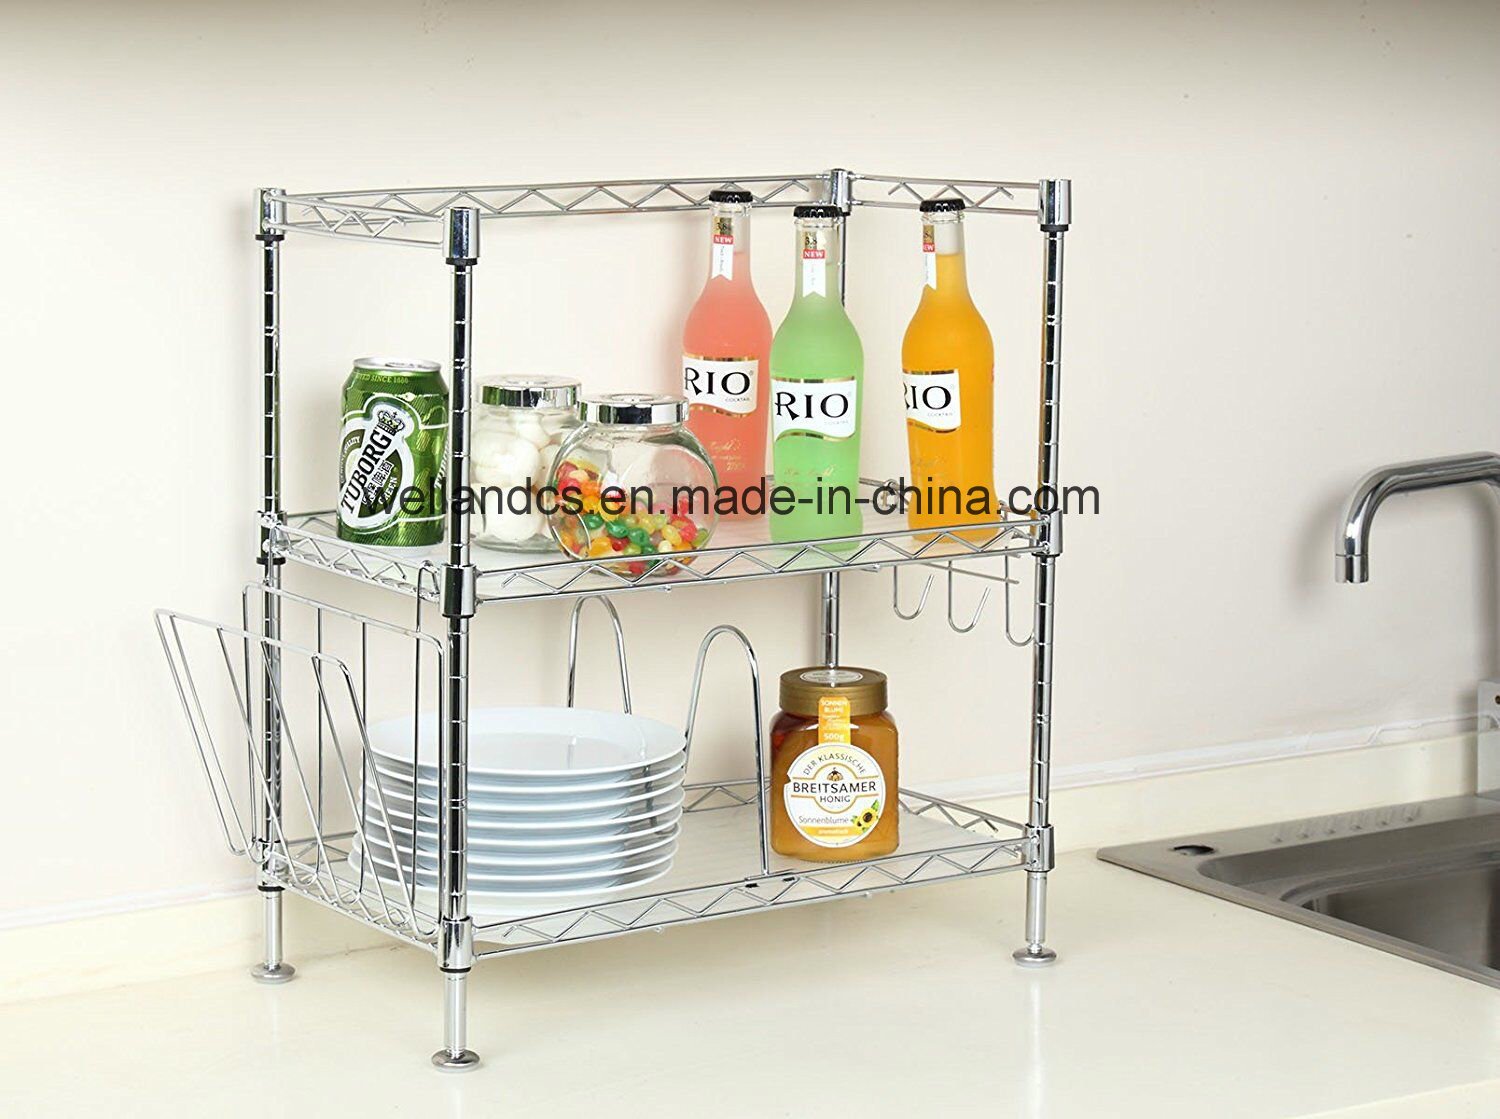 /proimages/2f0j00iETUPWvRqnbH/2018-hot-sale-chrome-plated-2-tiers-adjustable-kitchen-bakers-microwave-wire-rack.jpg